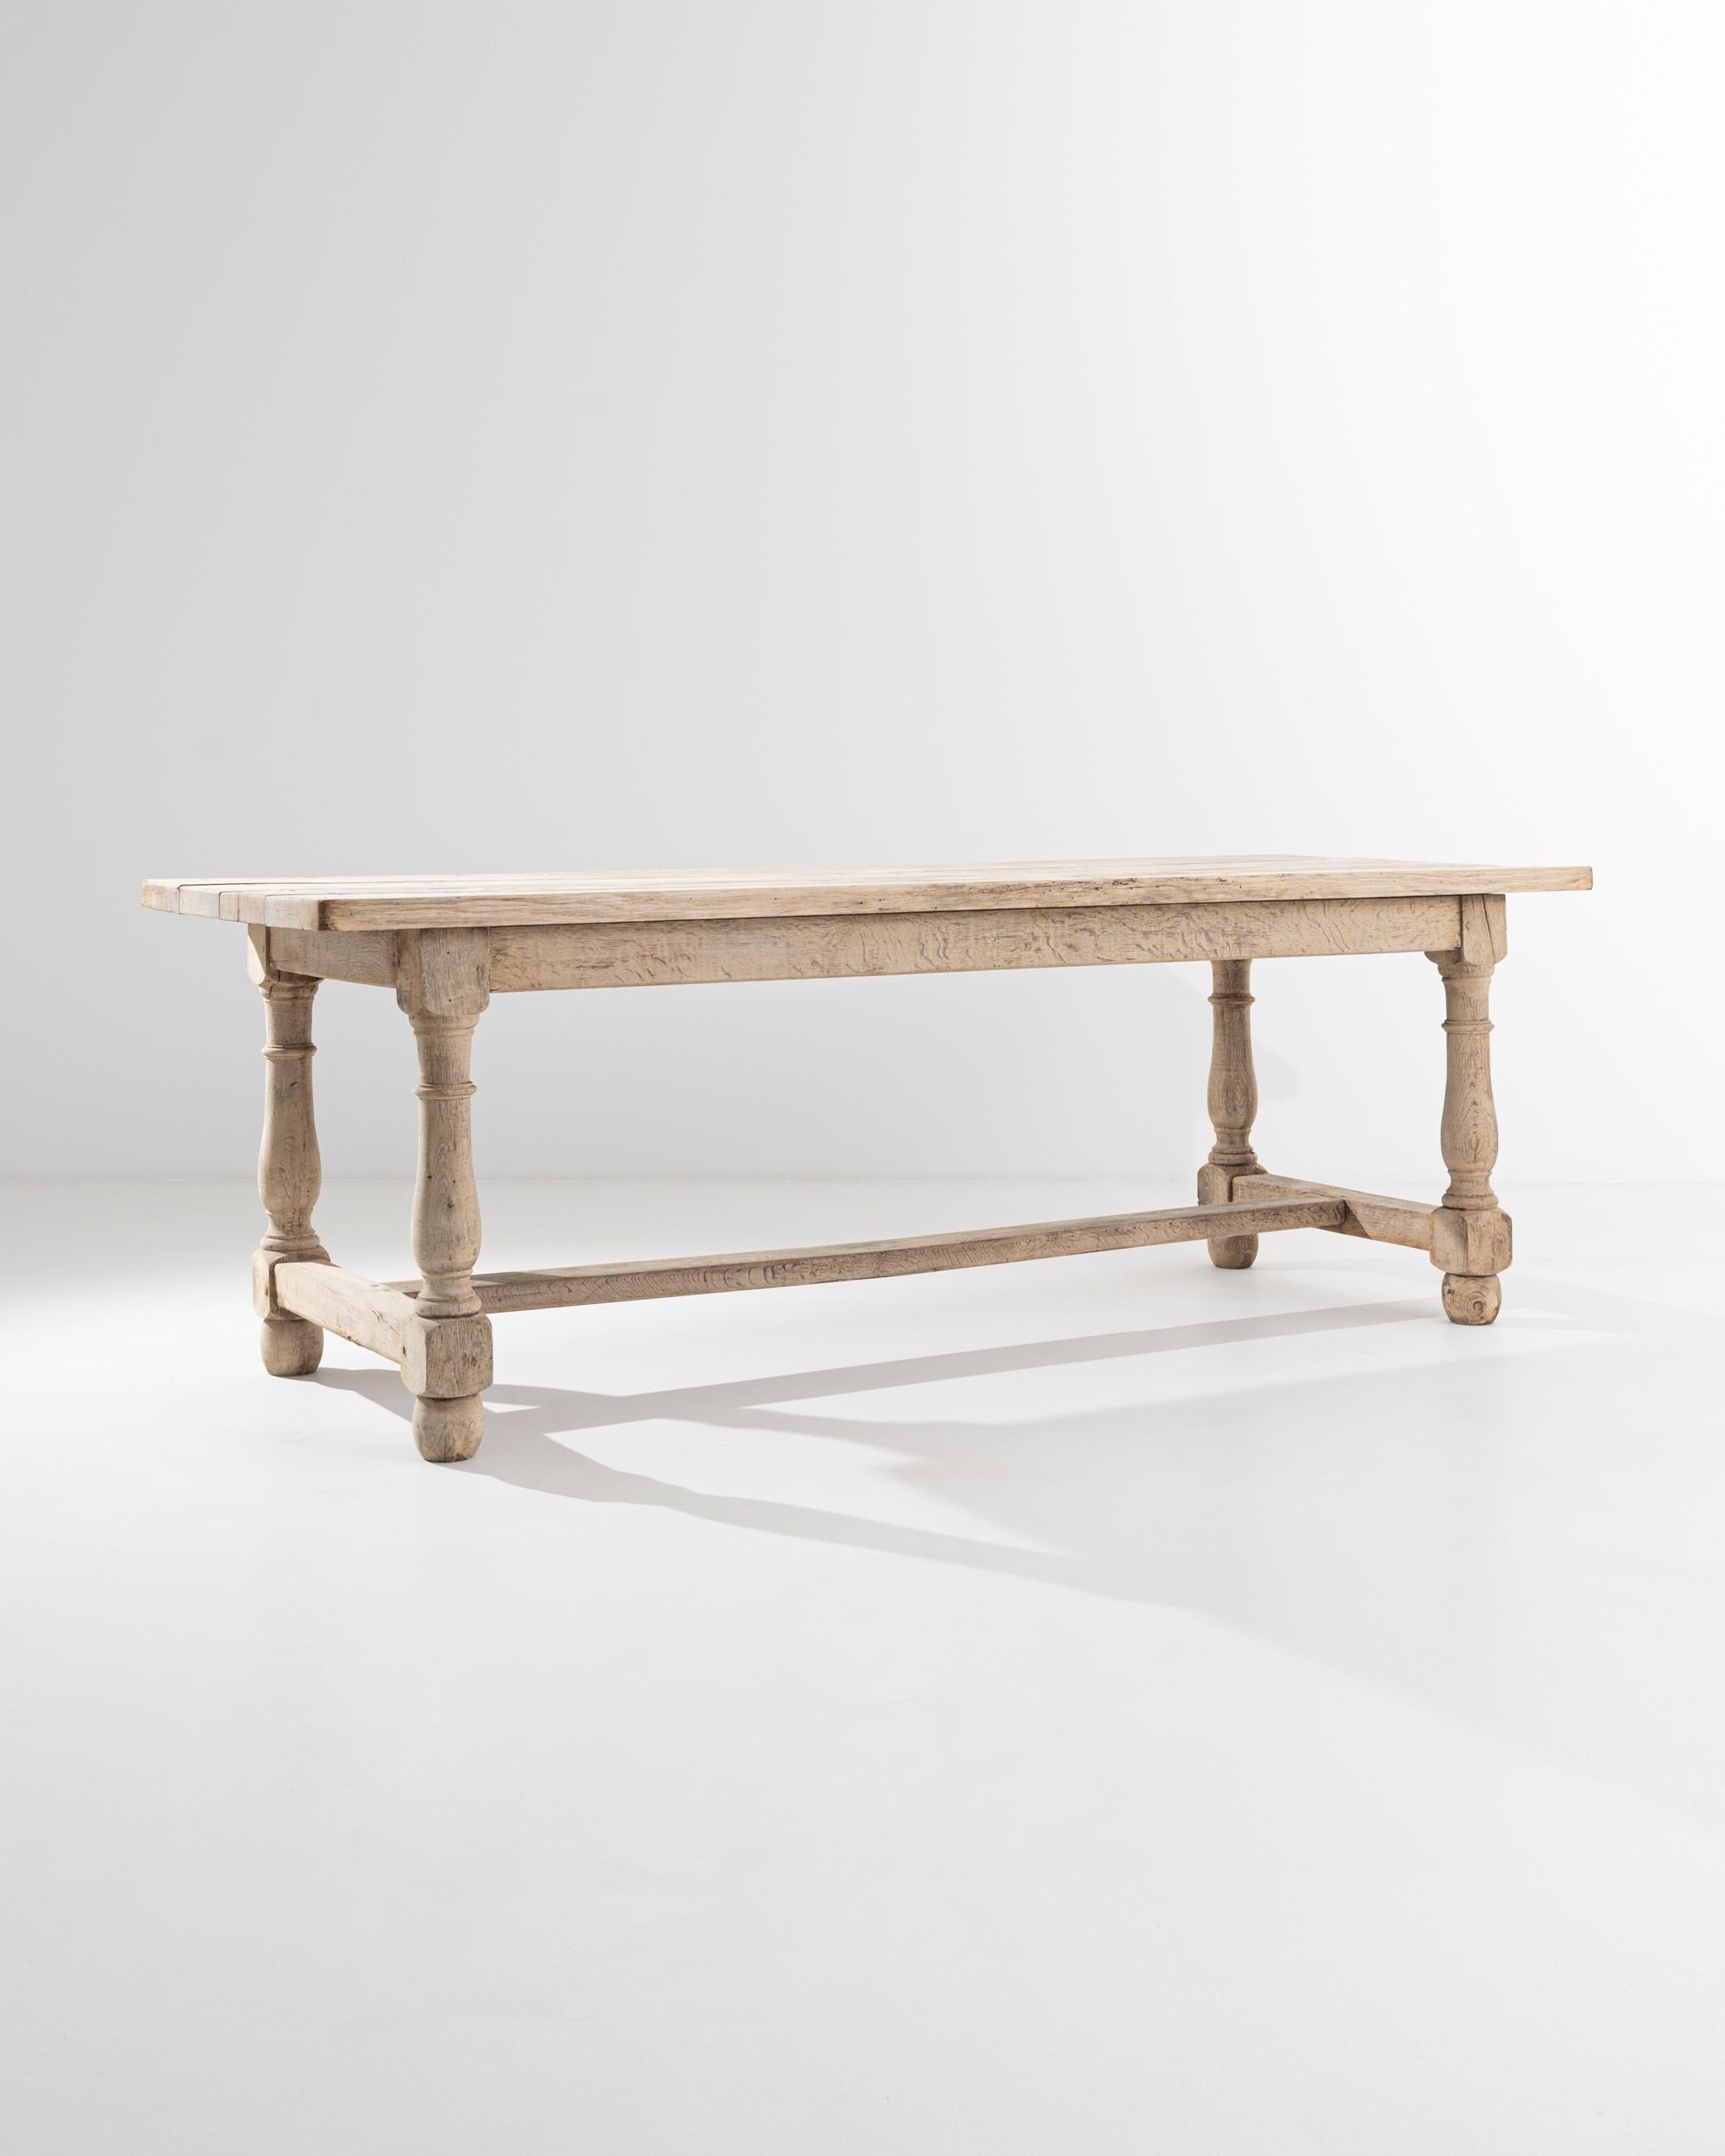 20th Century Belgian Bleached Oak Dining Table